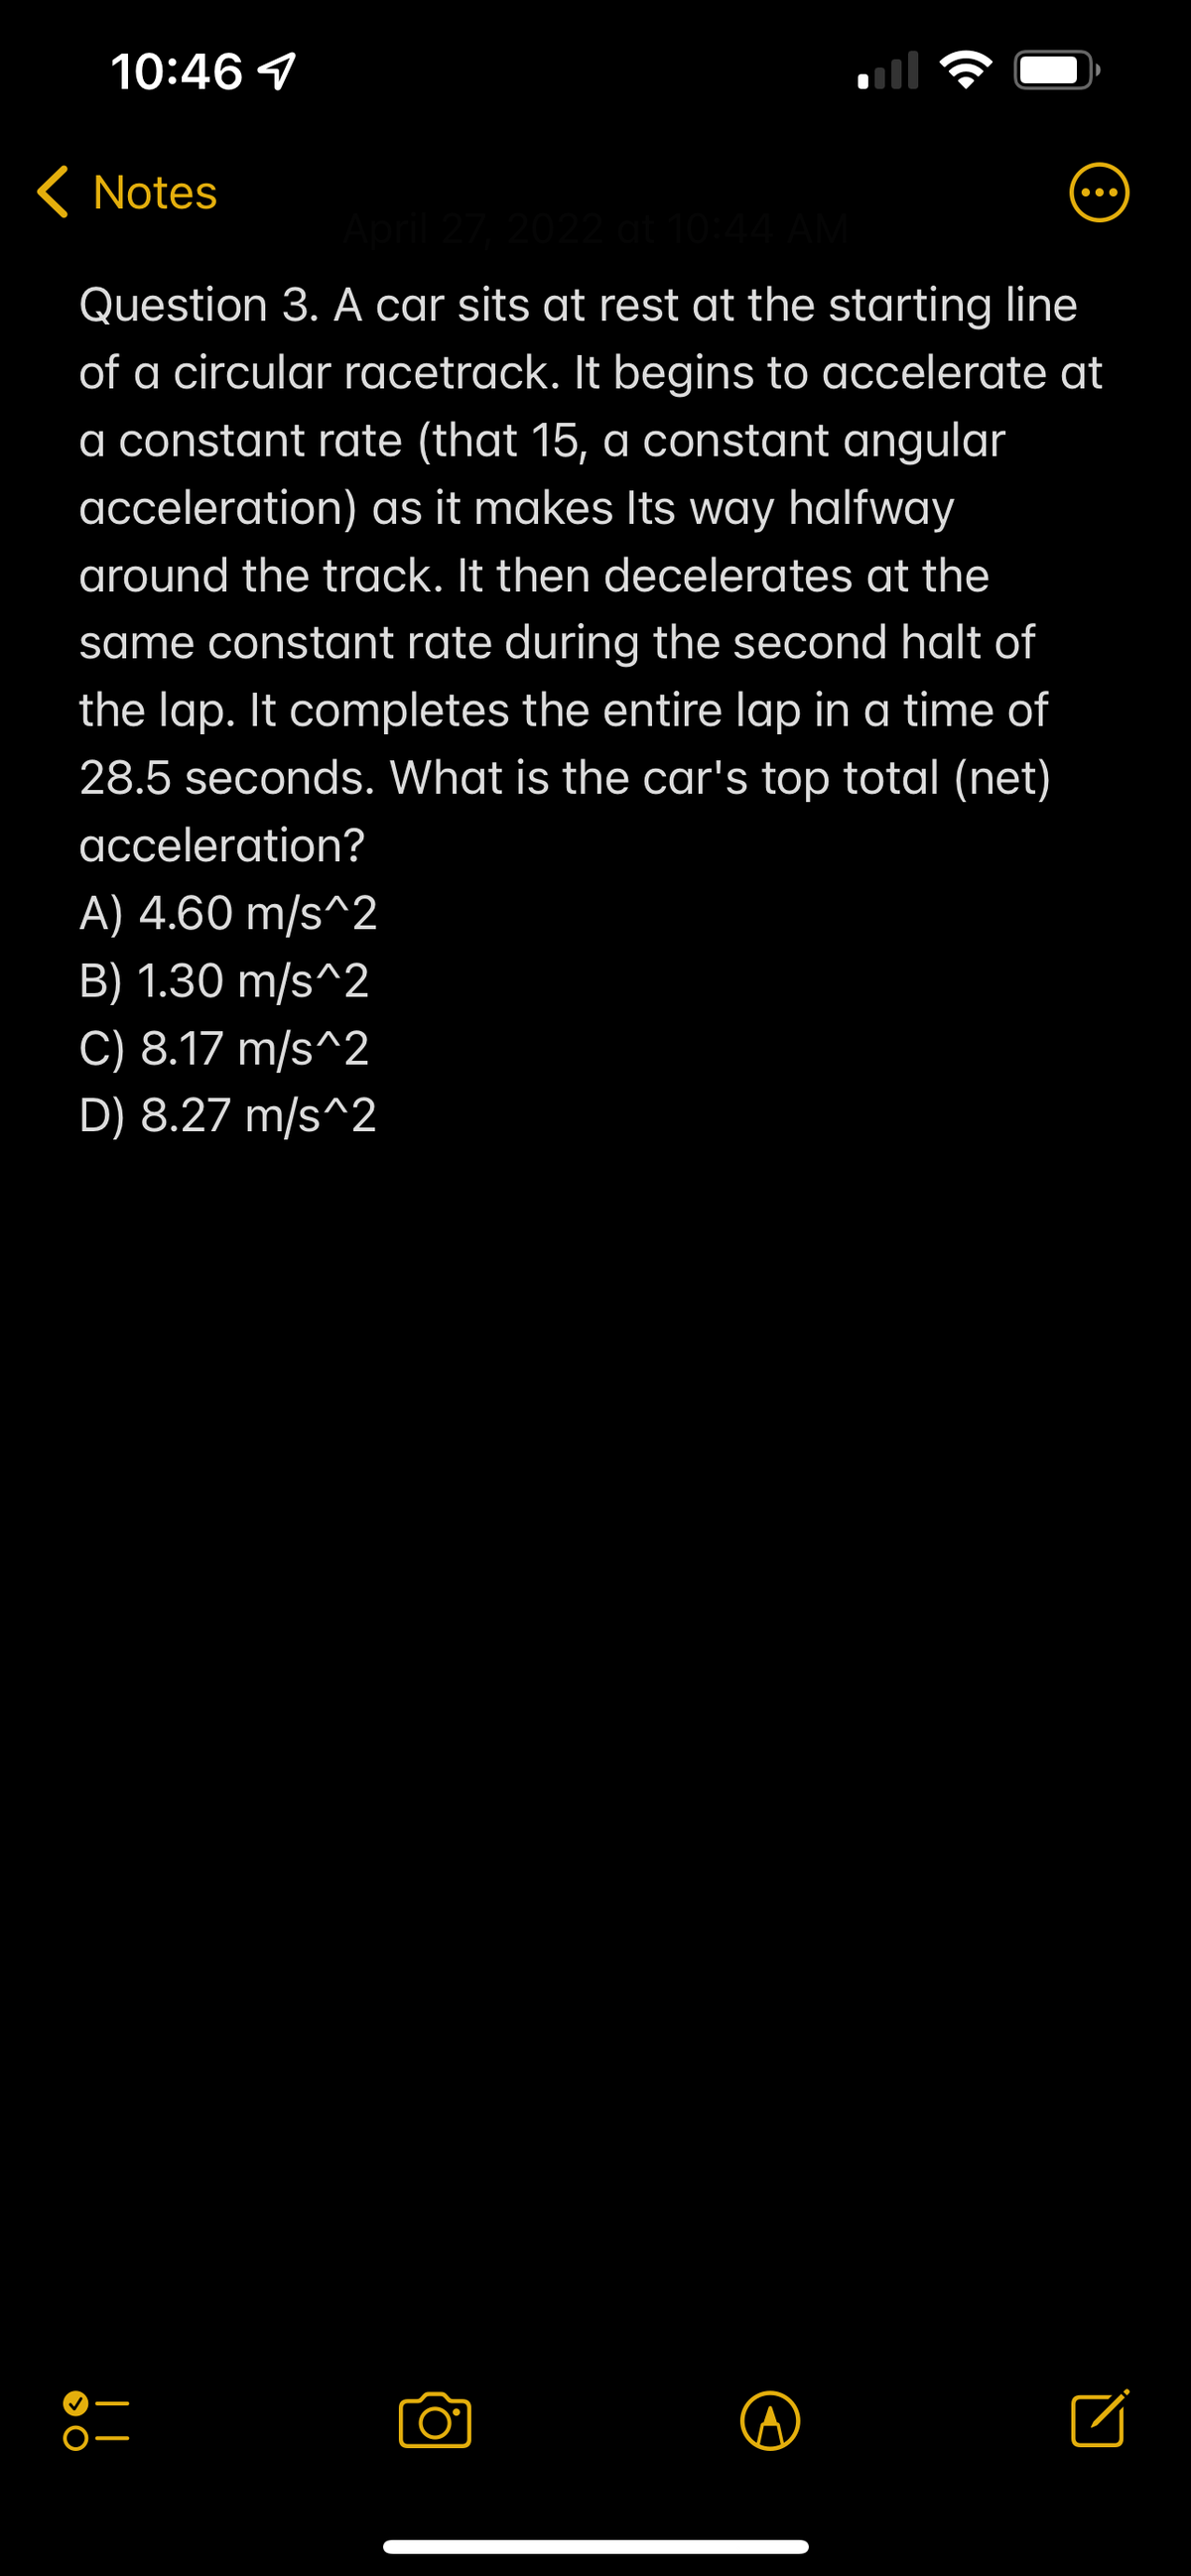 10:46 4
< Notes
• ..
022 at 10:44
Question 3. A car sits at rest at the starting line
of a circular racetrack. It begins to accelerate at
a constant rate (that 15, a constant angular
acceleration) as it makes lts way halfway
around the track. It then decelerates at the
same constant rate during the second halt of
the lap. It completes the entire lap in a time of
28.5 seconds. What is the car's top total (net)
acceleration?
A) 4.60 m/s^2
B) 1.30 m/s^2
C) 8.17 m/s^2
D) 8.27 m/s^2
